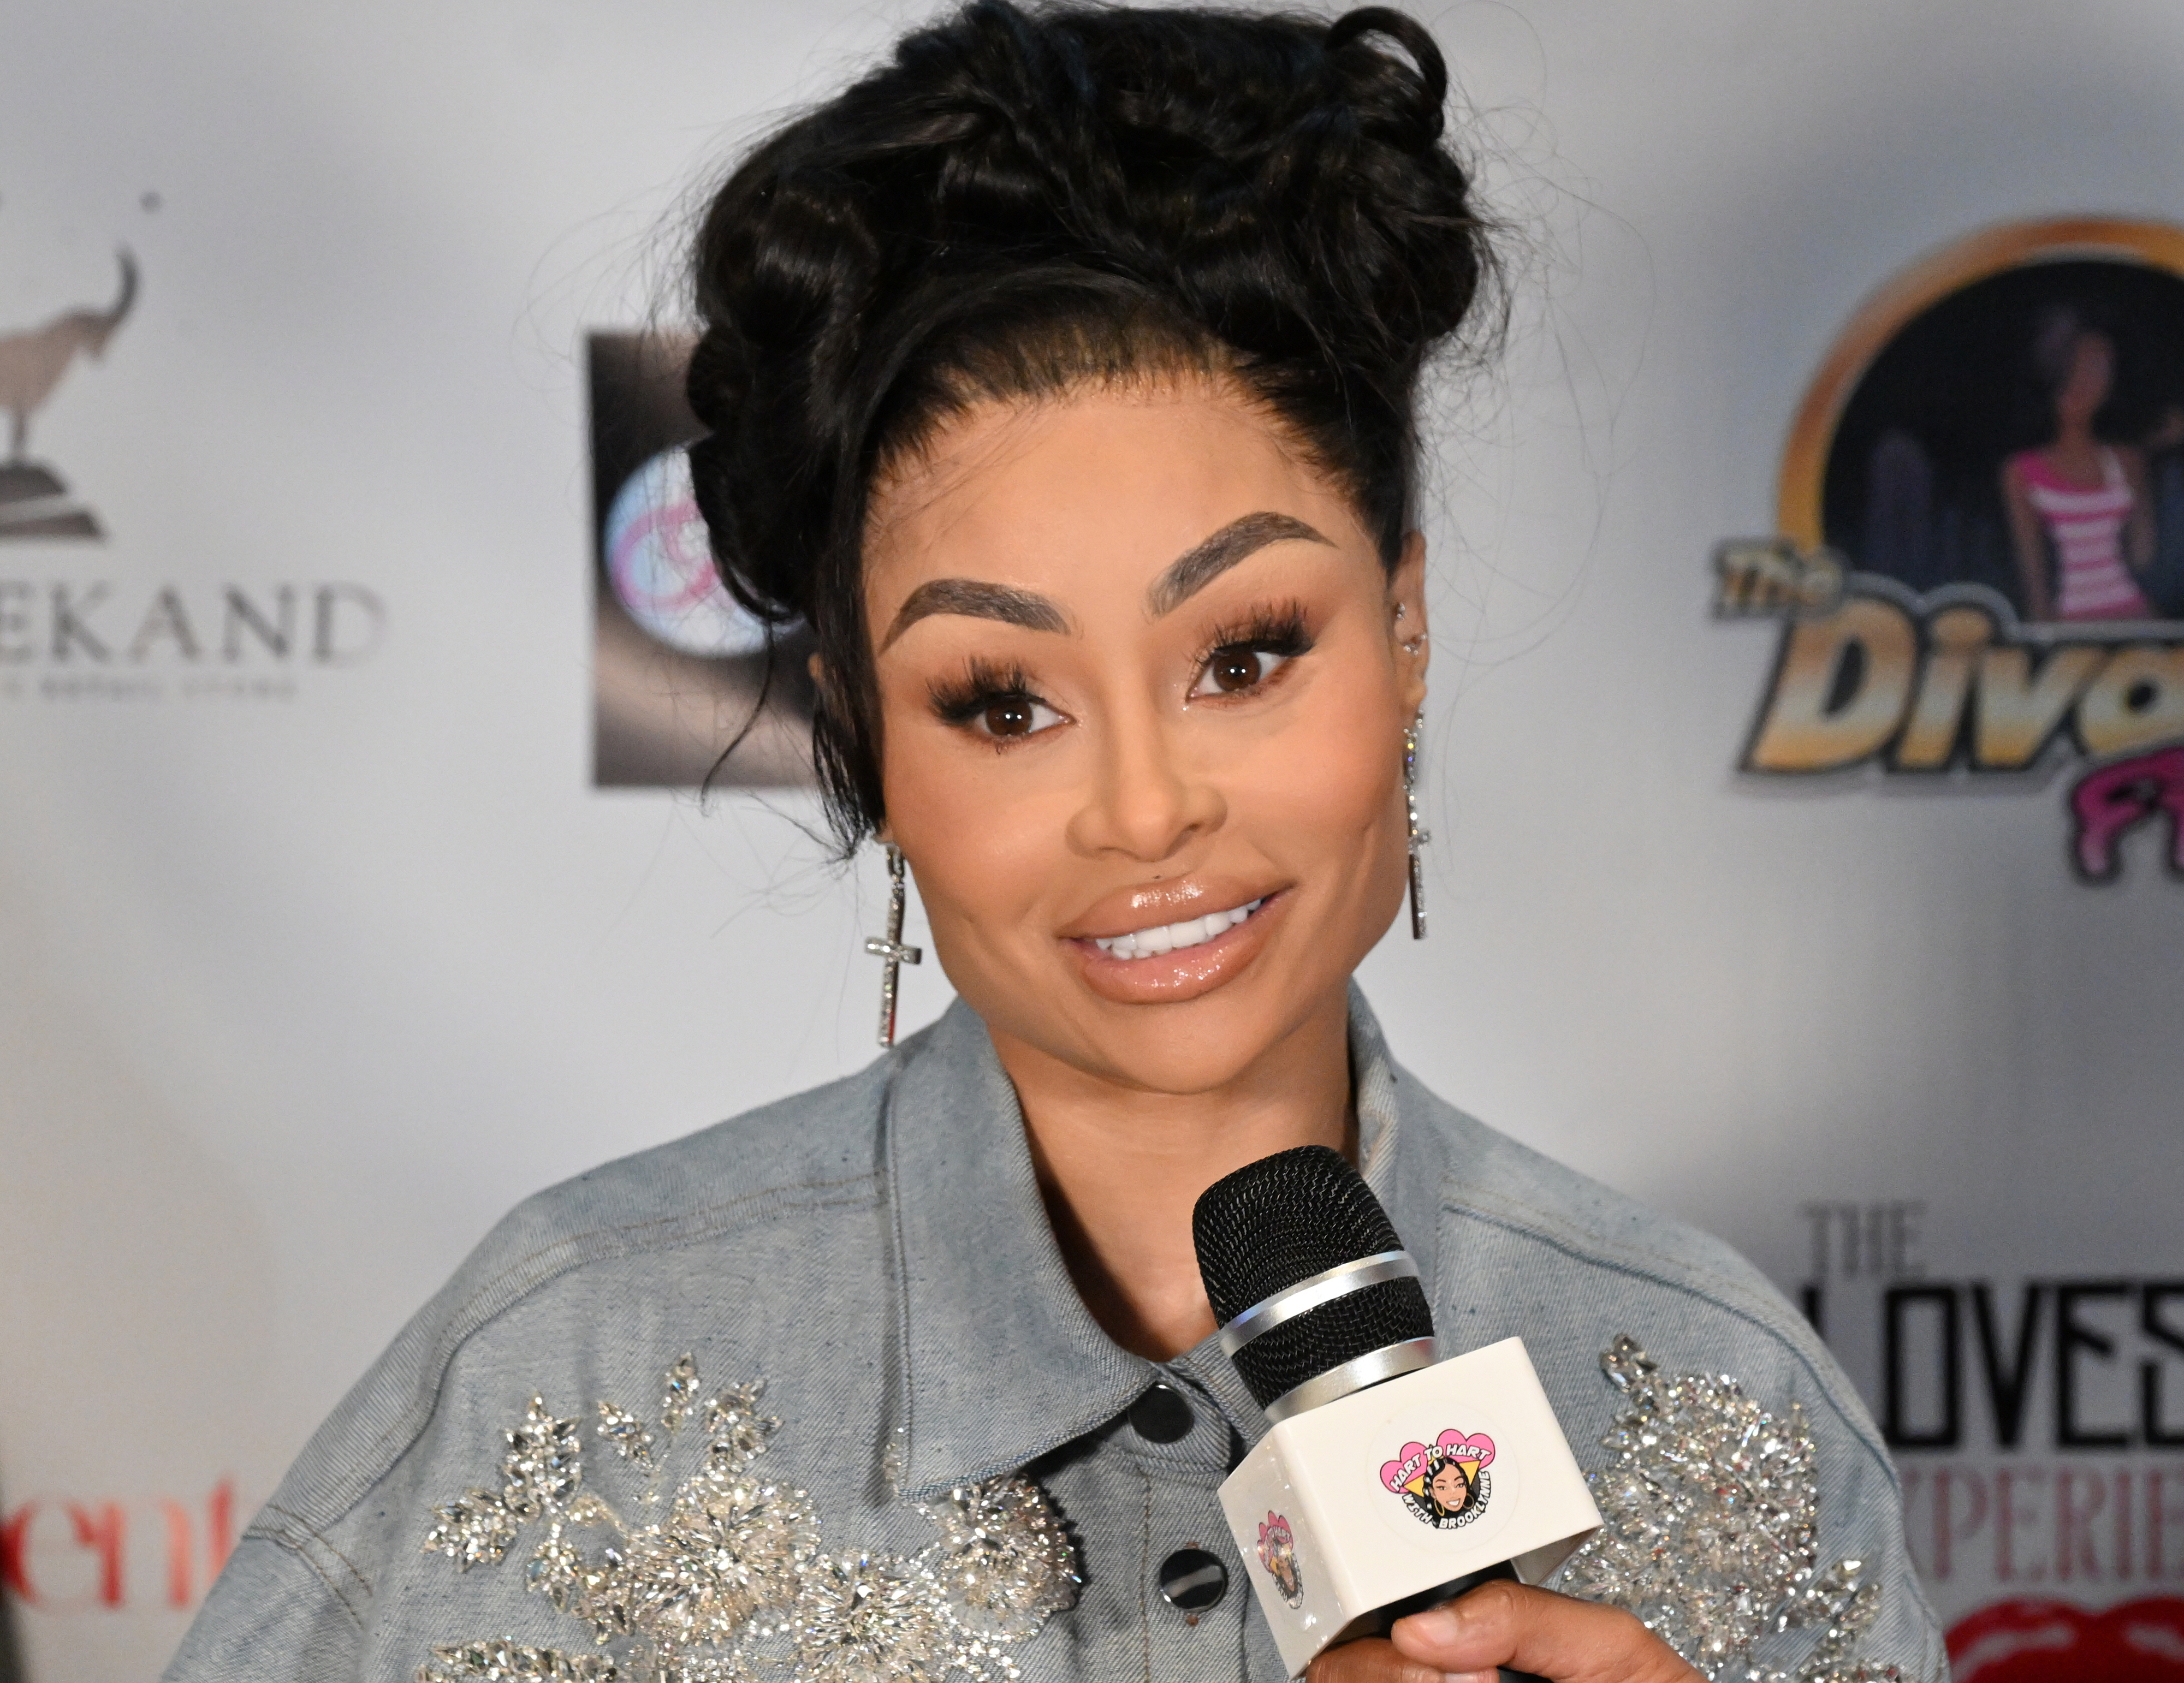 Close-up of Blac Chyna at a media event